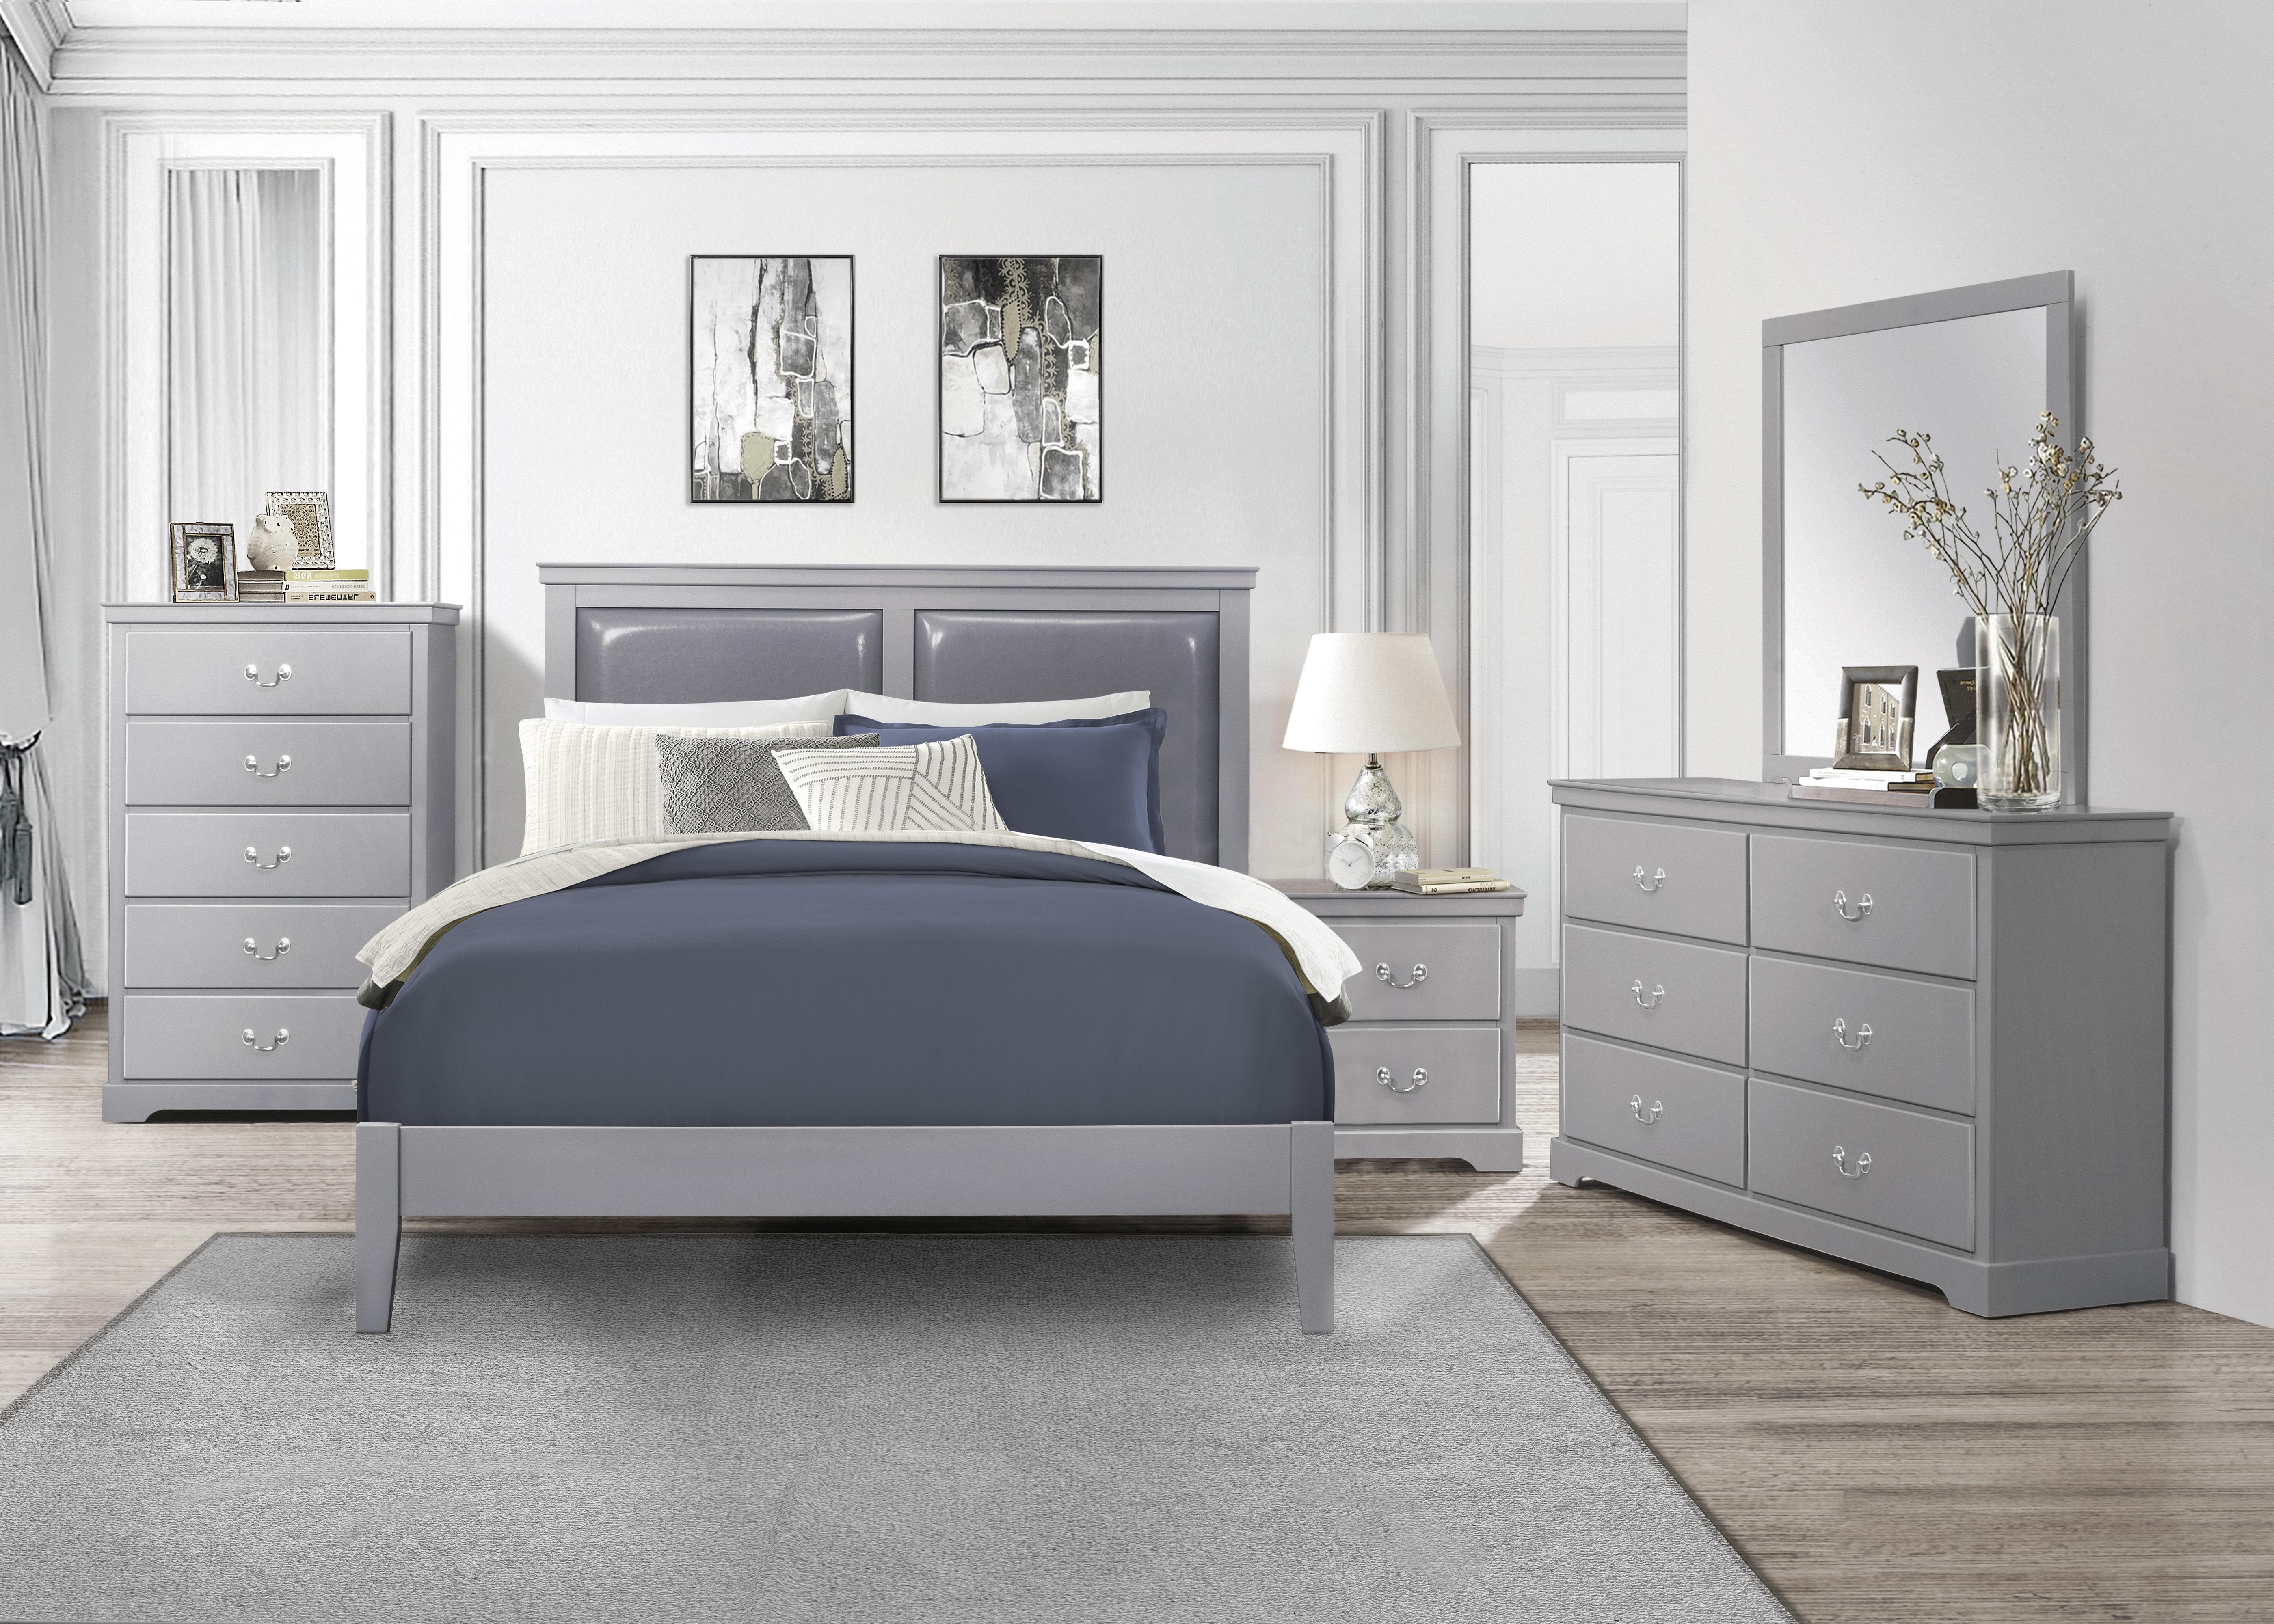 Modern Bedroom Set 1519GY-1-6PC Seabright 1519GY-1-6PC in Gray Faux Leather